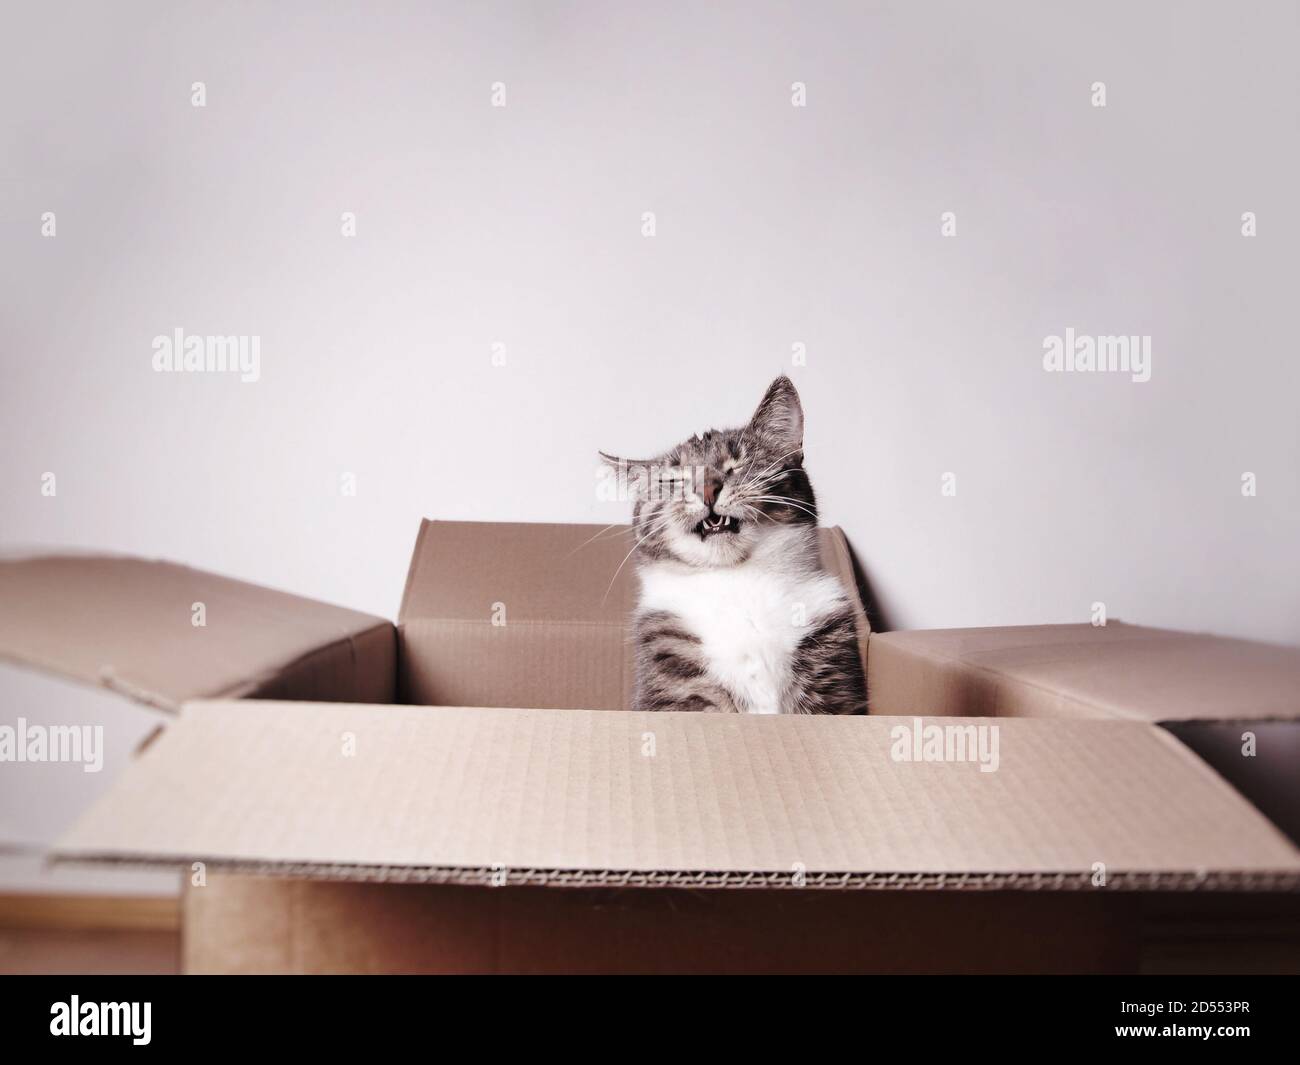 funny laughing cat in a cardboard box or carton with copy space Stock Photo